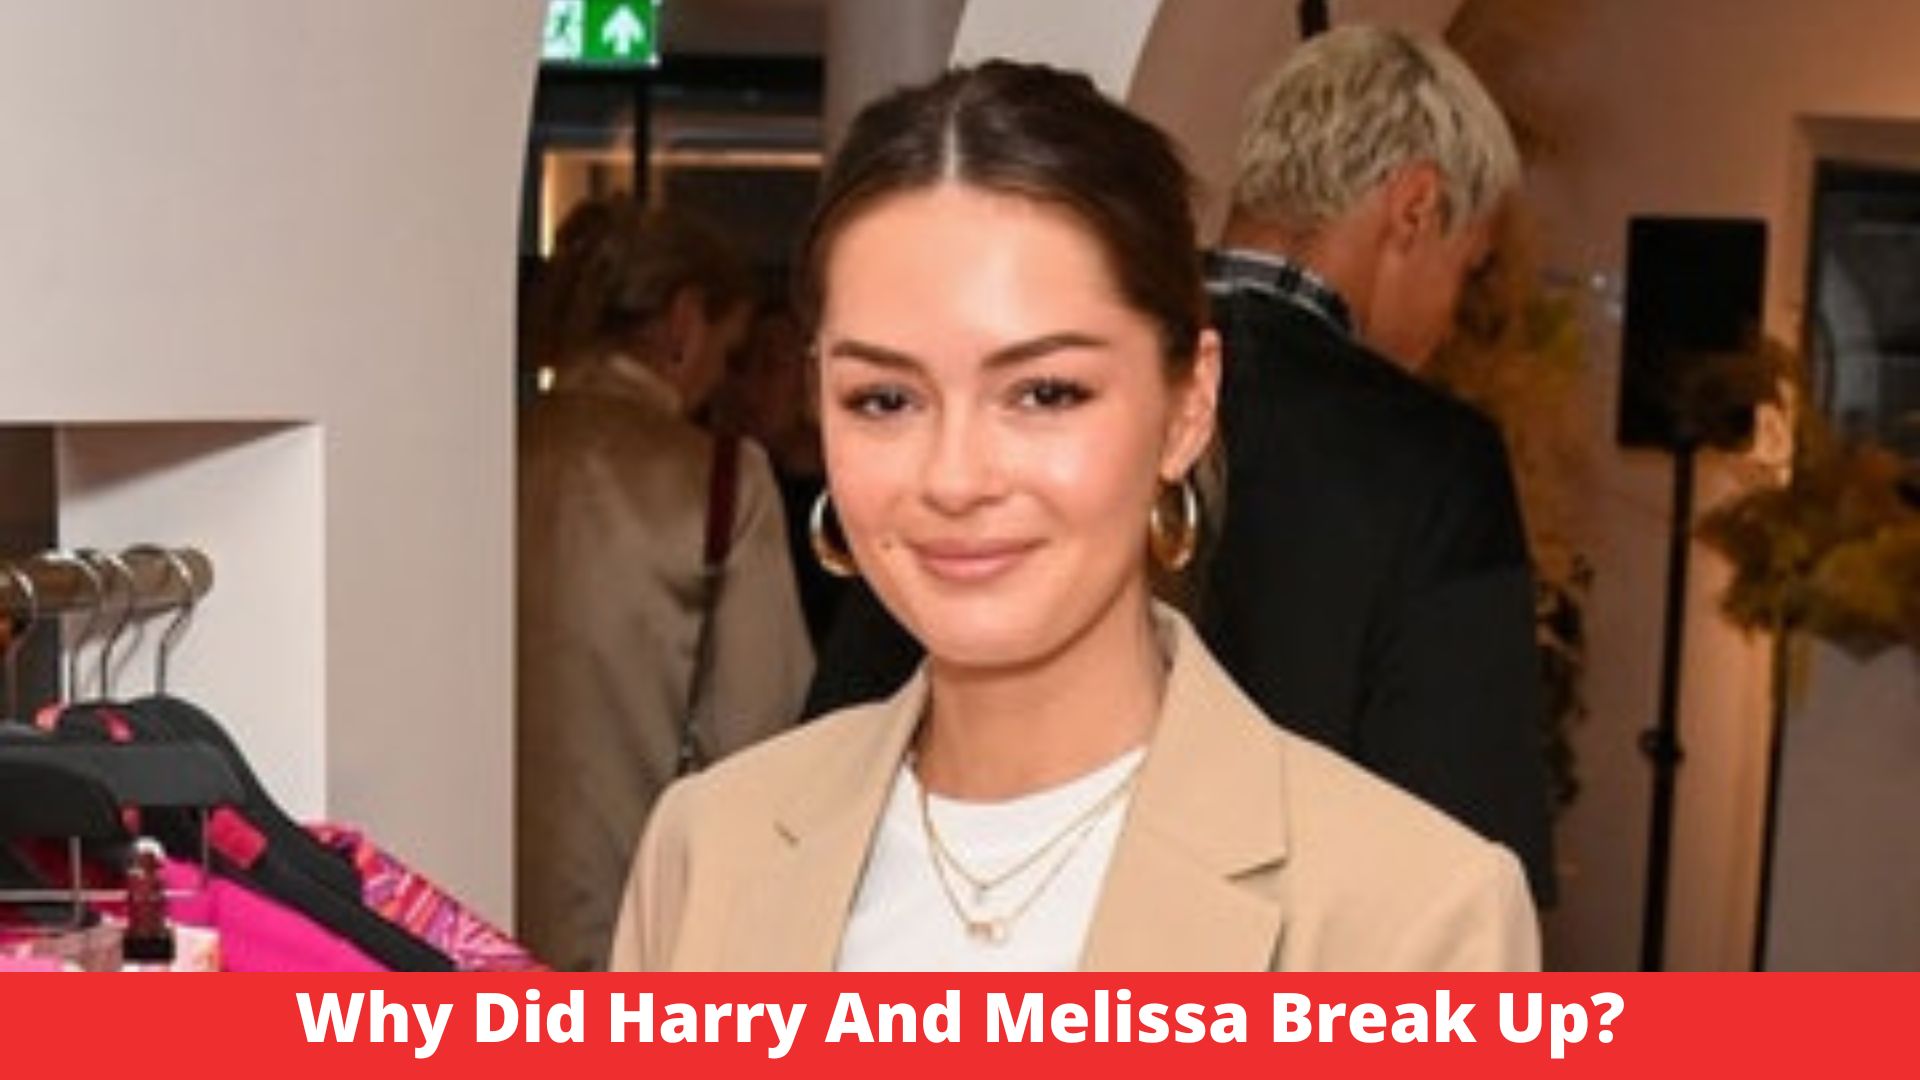 Why Did Harry And Melissa Break Up?